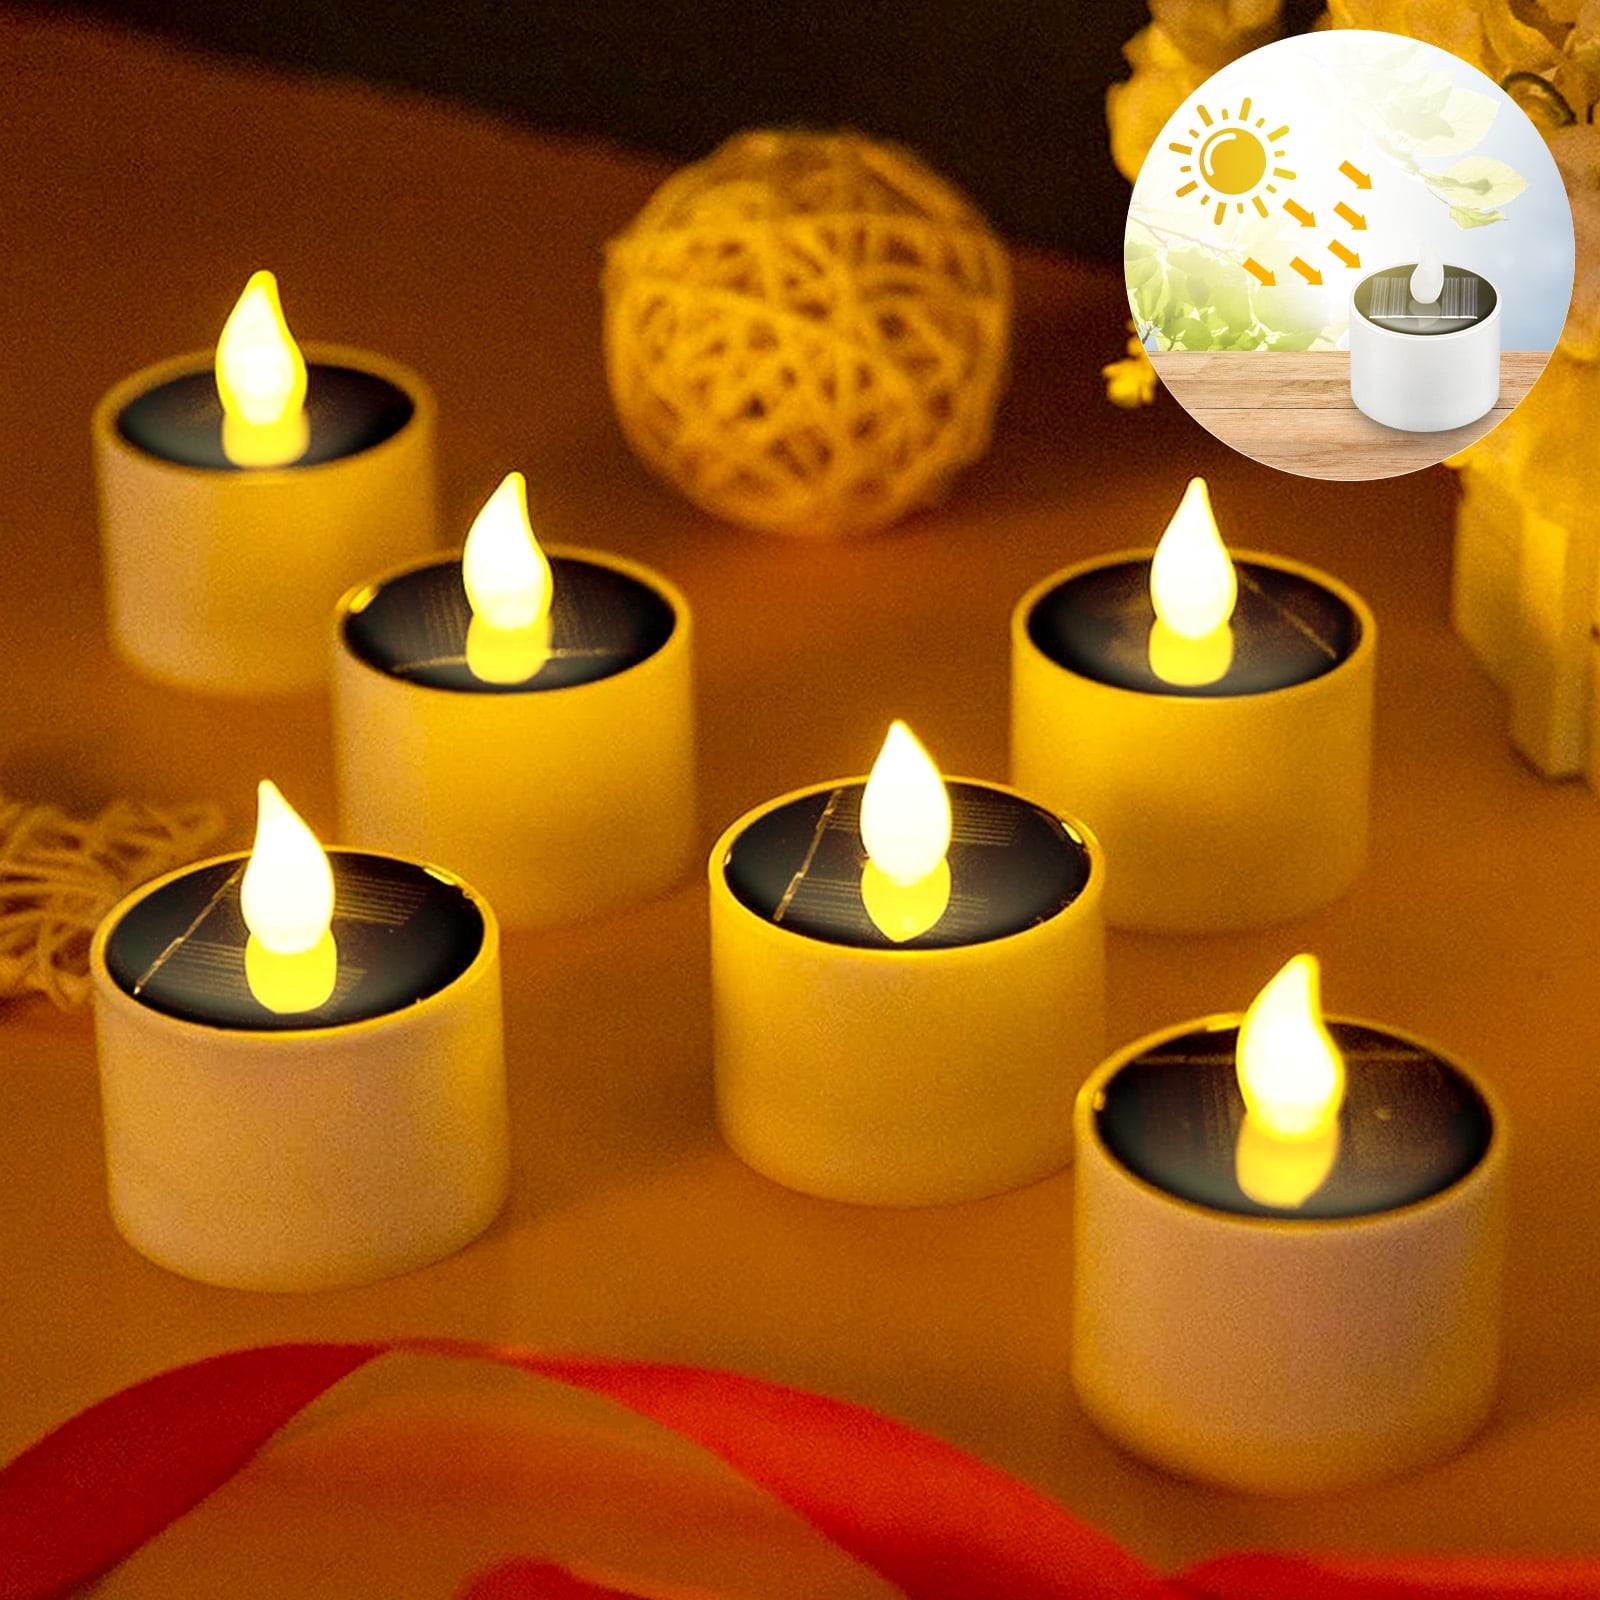 2022 New Candles,Flameless Candles Light Solar Powered Flickering Candle Light Solar Candle lamp Solar Energy Rechargeable Tea Wax lamp 6 Pieces Solar LED Candle lamp Solar Tea Lights 